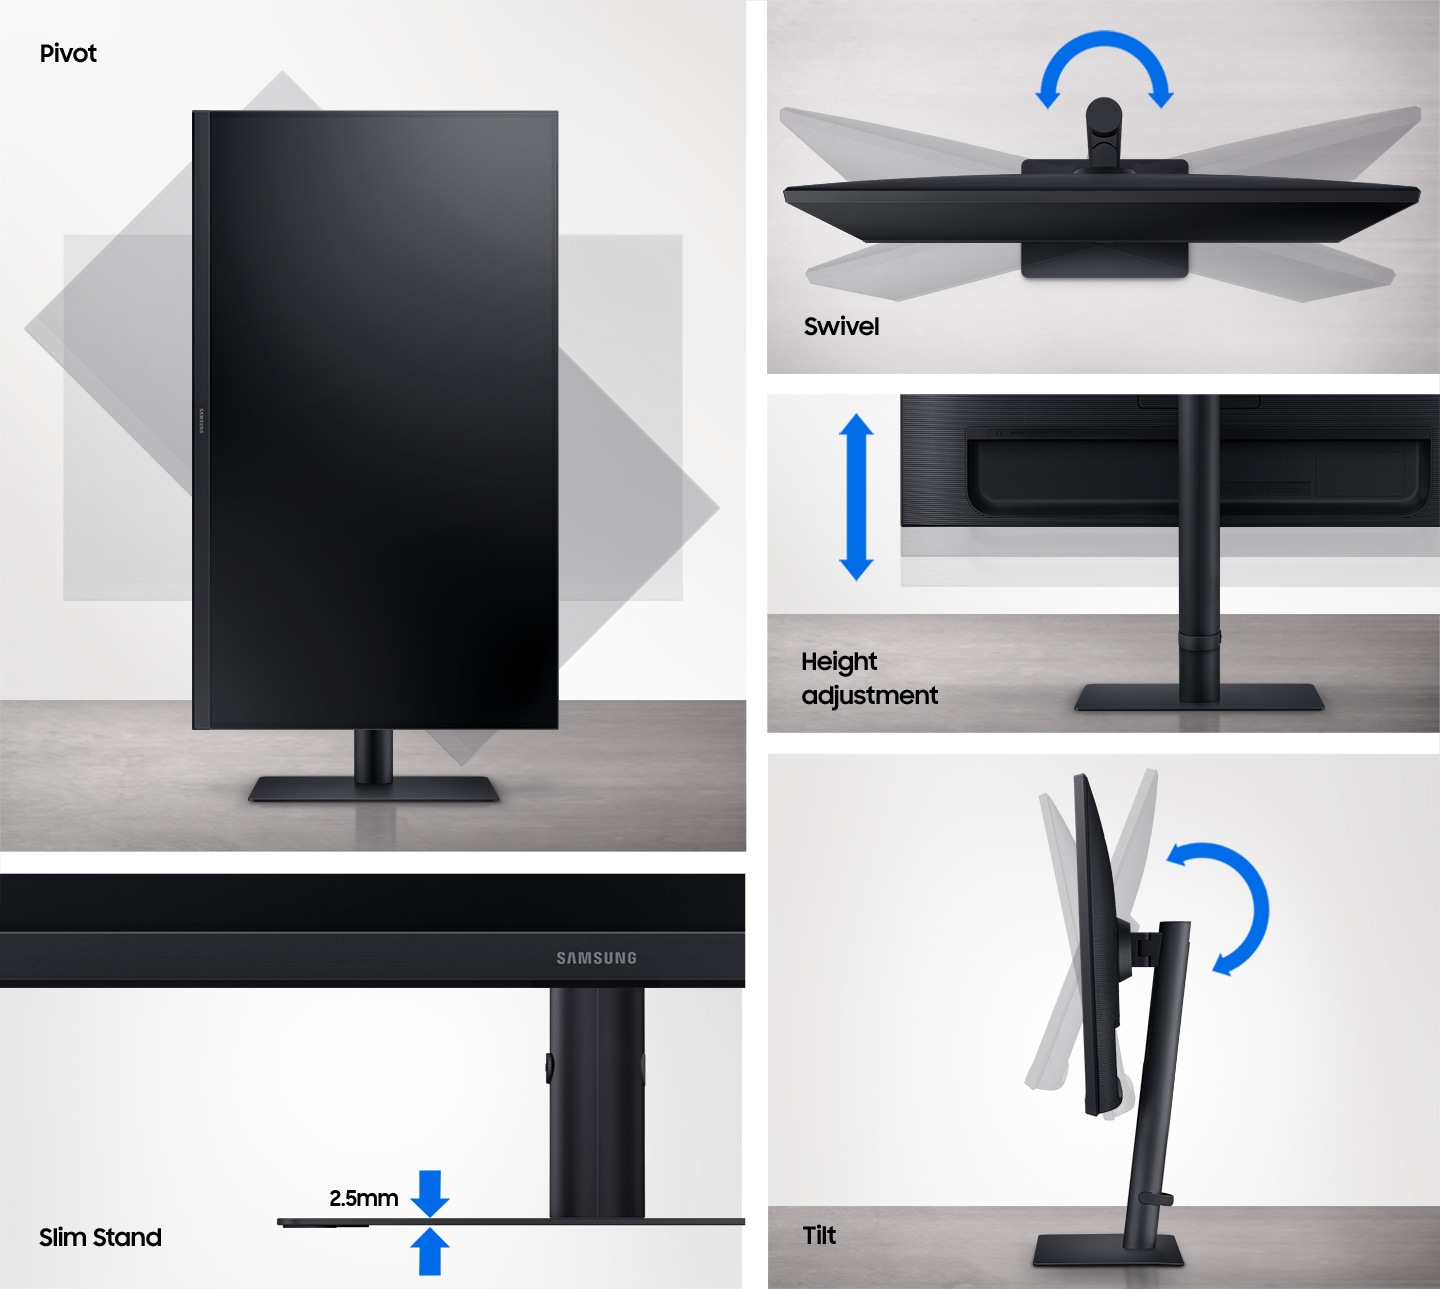 The operating range of the Pivot, Swivel, Height adjustment, and Tilt functions of the S61b monitor is shown as a transparent. And the 2.5mm Slim Stand is enlarged.